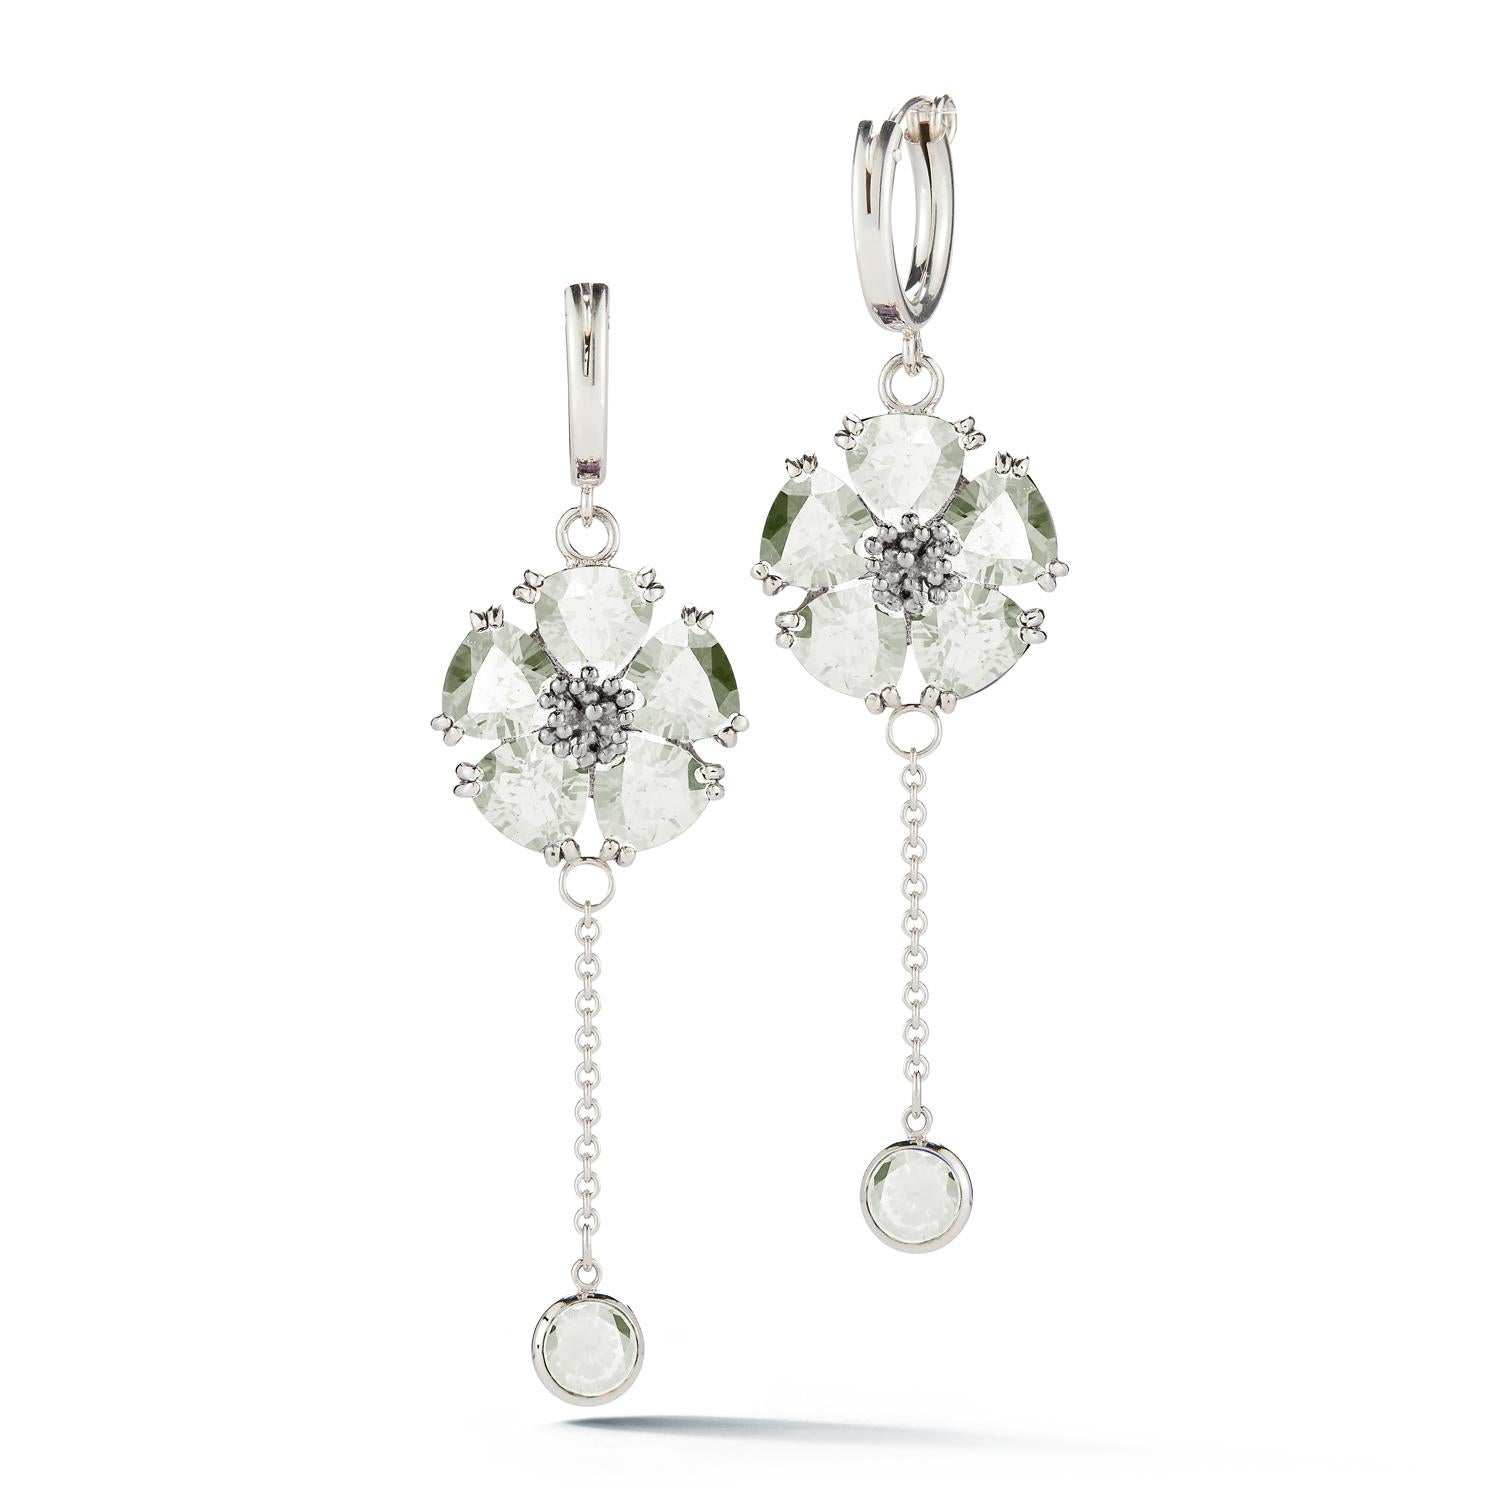 Designed in NYC

.925 Sterling Silver 2 x 6 mm Olive Peridot Blossom Stone Small Hoop Chain Earrings. No matter the season, allow natural beauty to surround you wherever you go. Blossom stone small hoop chain earrings: 

	Sterling silver